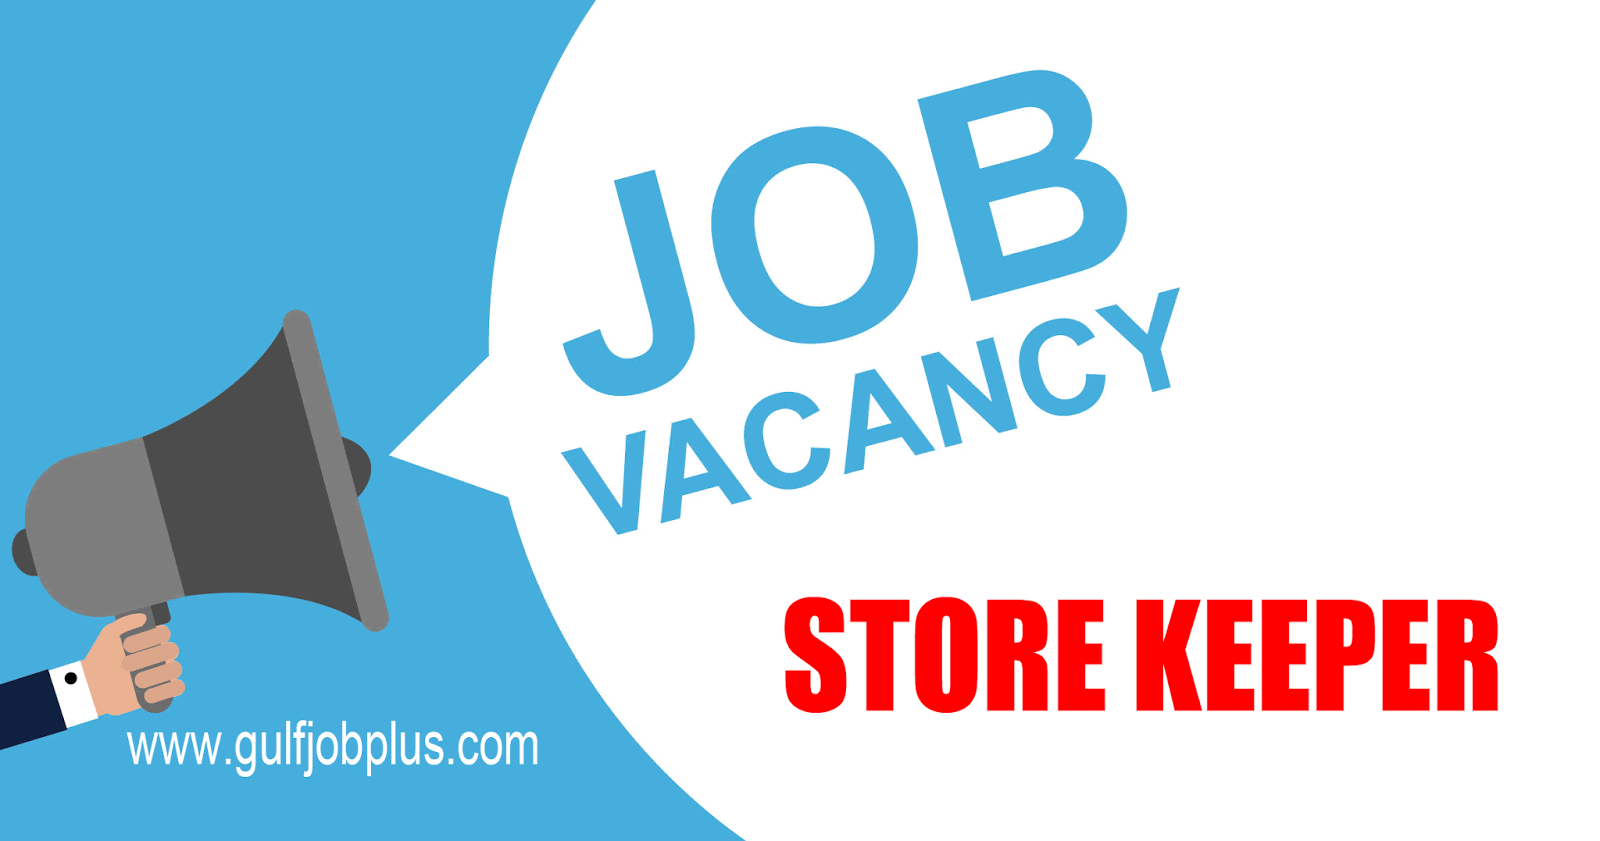 Store Keeper jobs available in Dubai